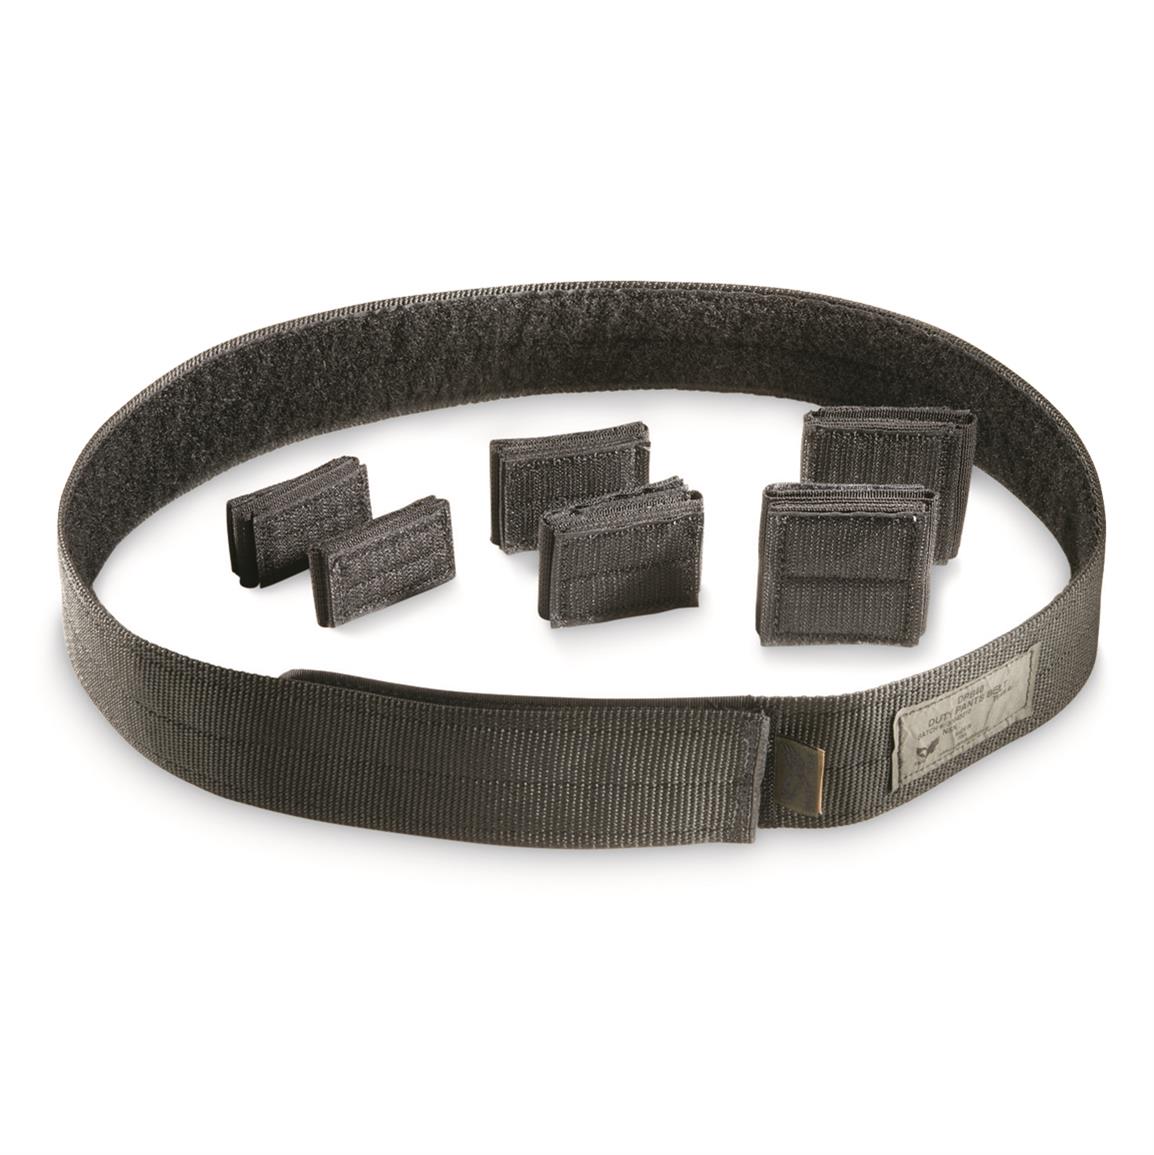 U.S. Military Surplus Eagle Industries Tactical Belt with Keepers, New, Black